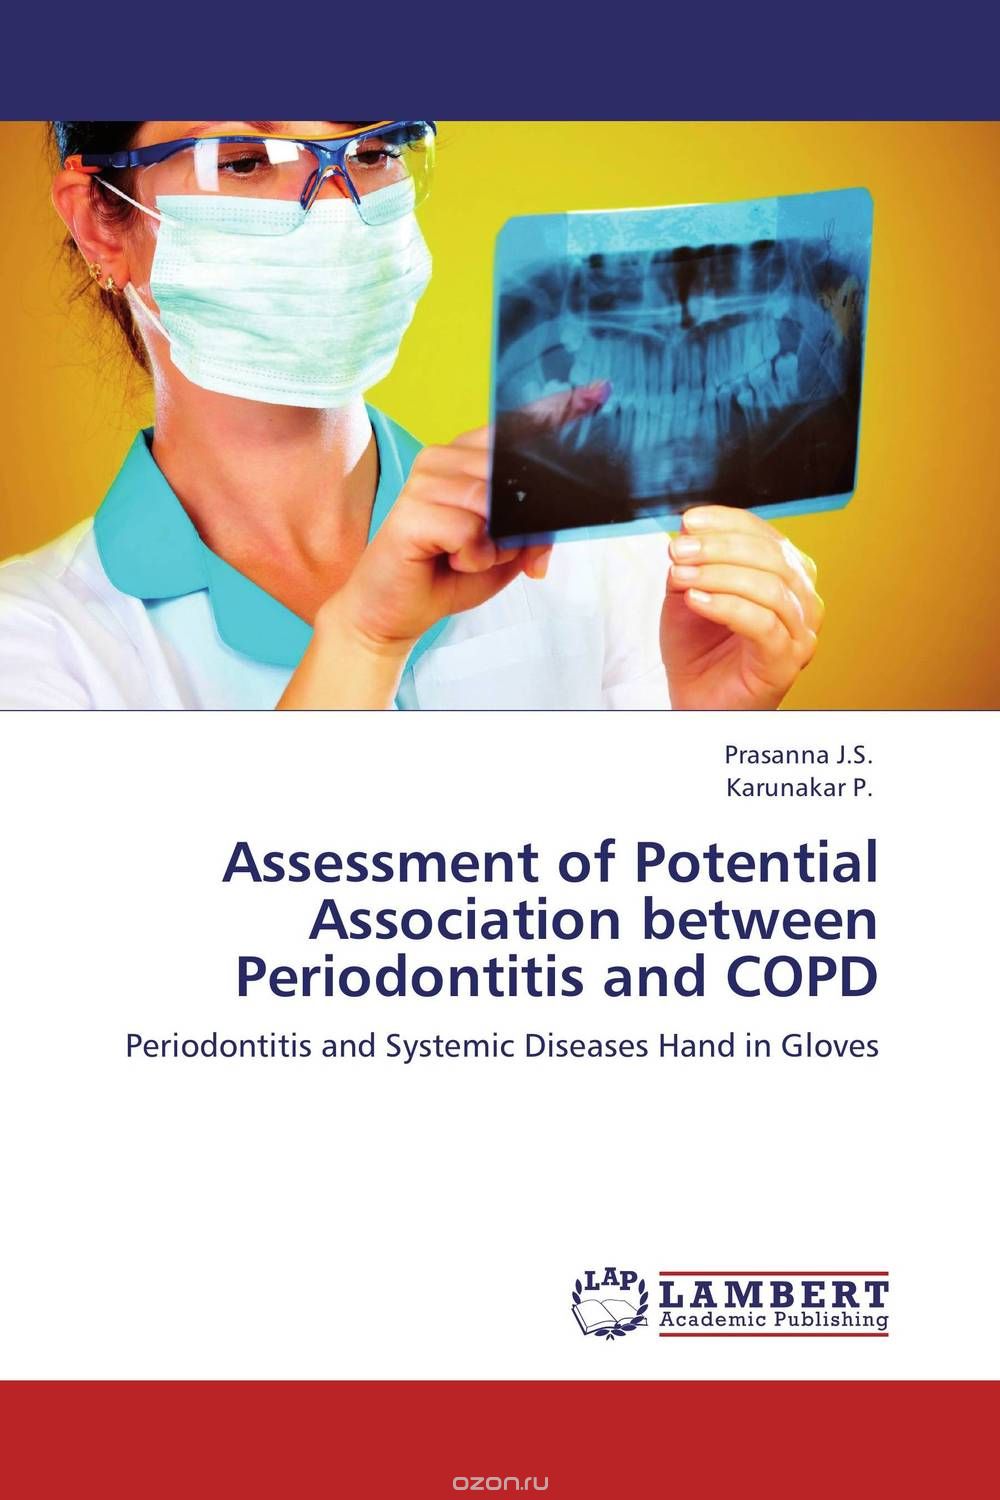 Assessment of Potential Association between Periodontitis and COPD